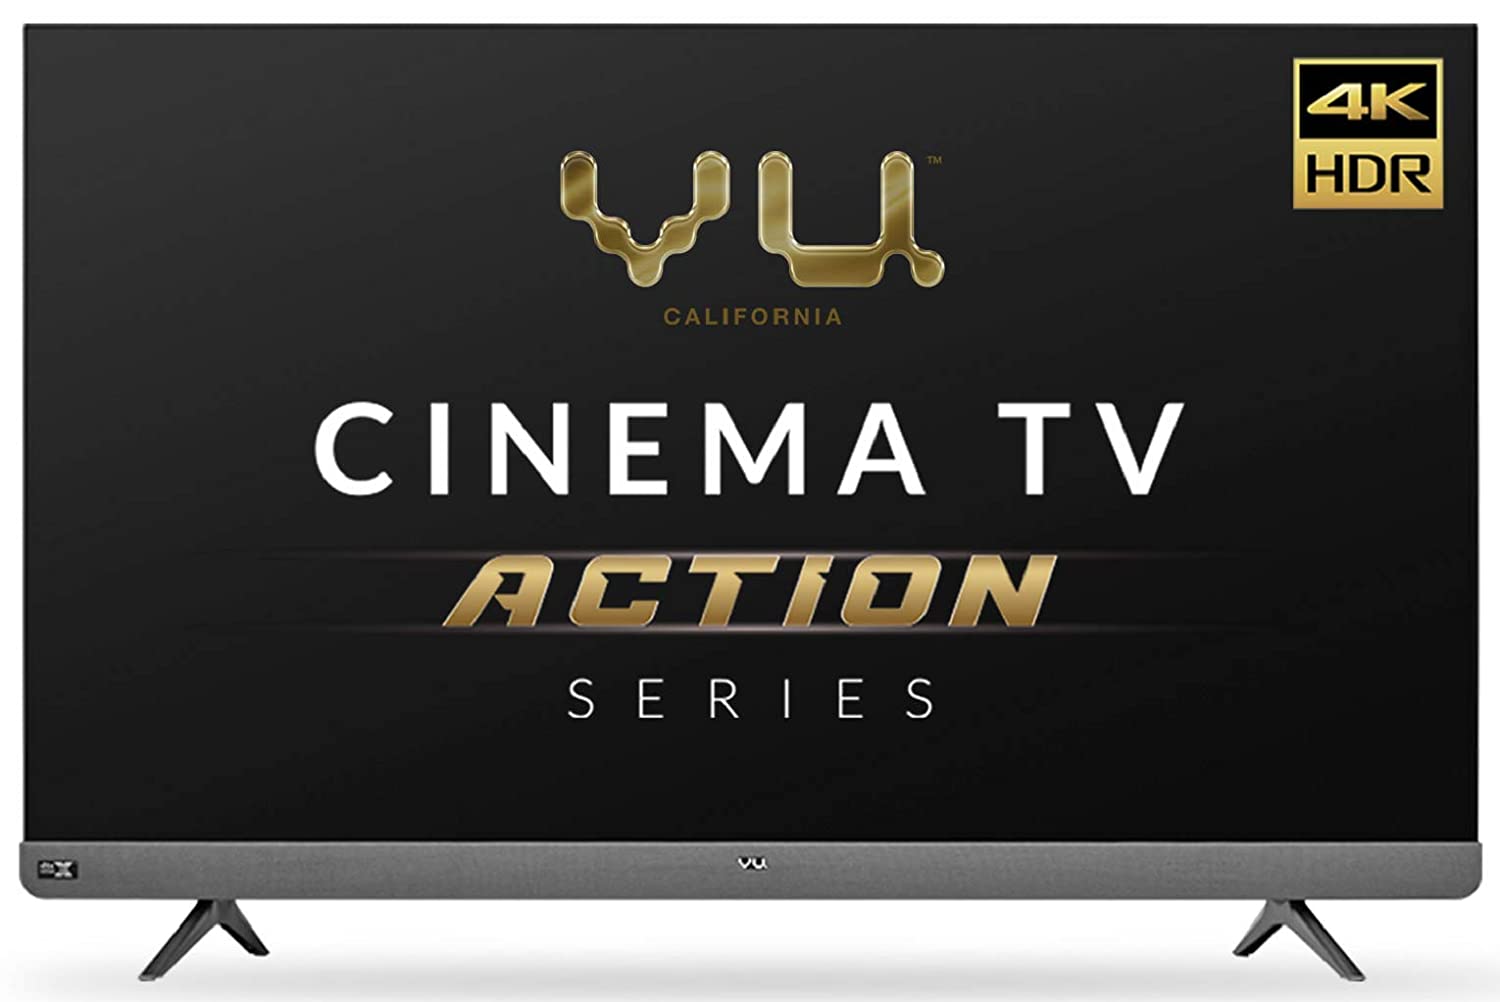 65 Inches 4K Ultra HD LED Action Series Cinema TV 